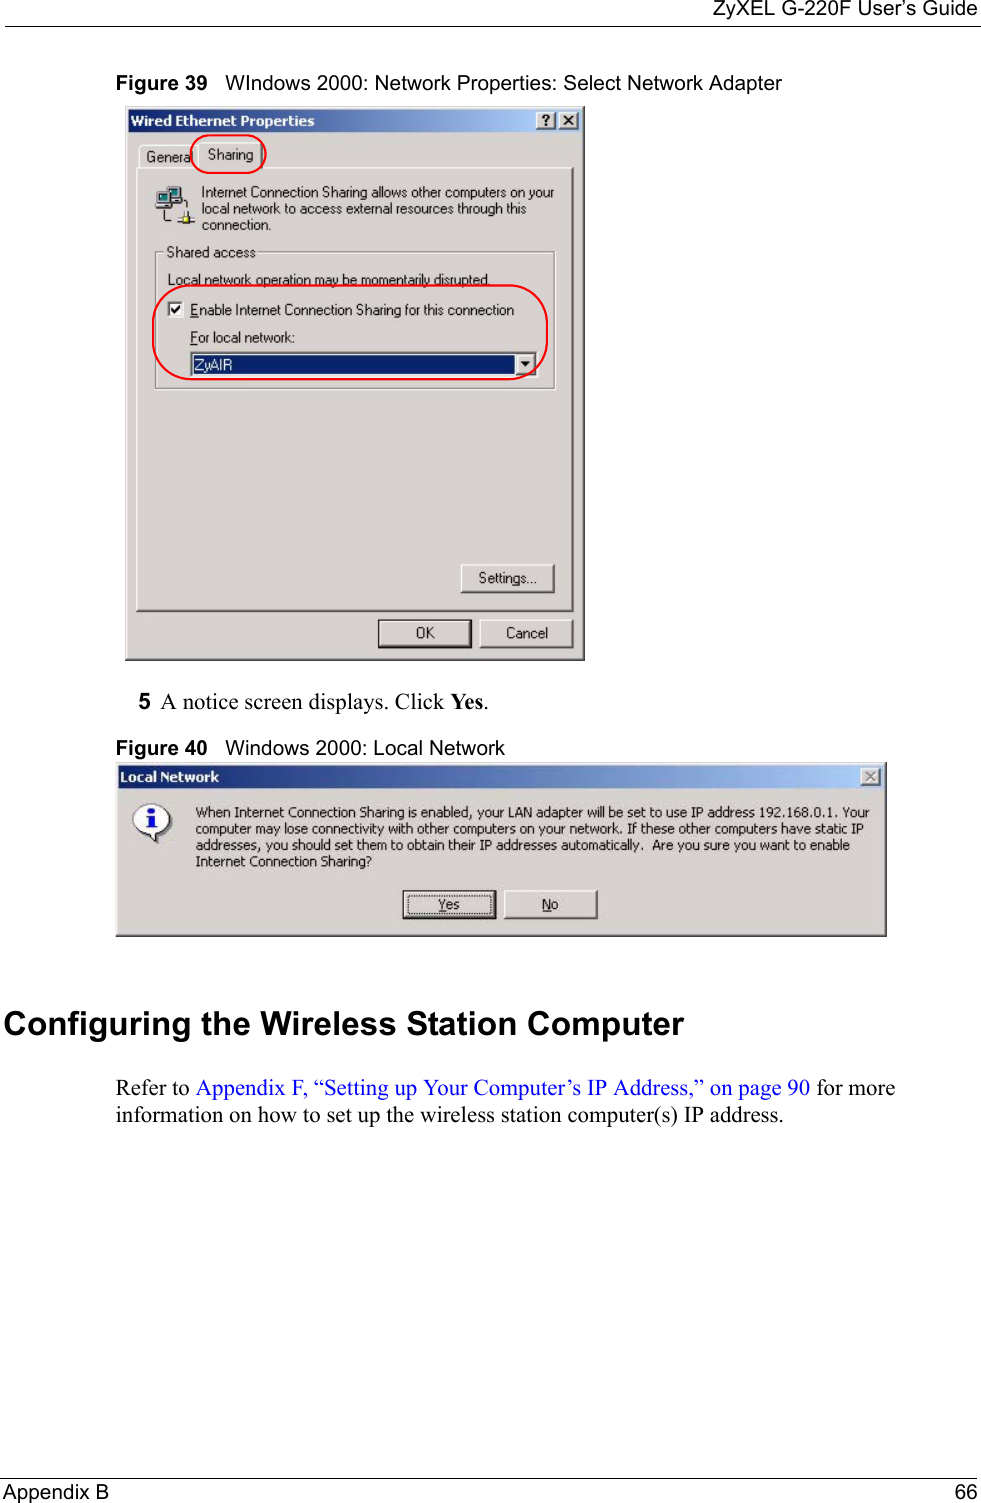 ZyXEL G-220F User’s GuideAppendix B 66Figure 39   WIndows 2000: Network Properties: Select Network Adapter 5A notice screen displays. Click Ye s . Figure 40   Windows 2000: Local Network Configuring the Wireless Station ComputerRefer to Appendix F, “Setting up Your Computer’s IP Address,” on page 90 for more information on how to set up the wireless station computer(s) IP address.